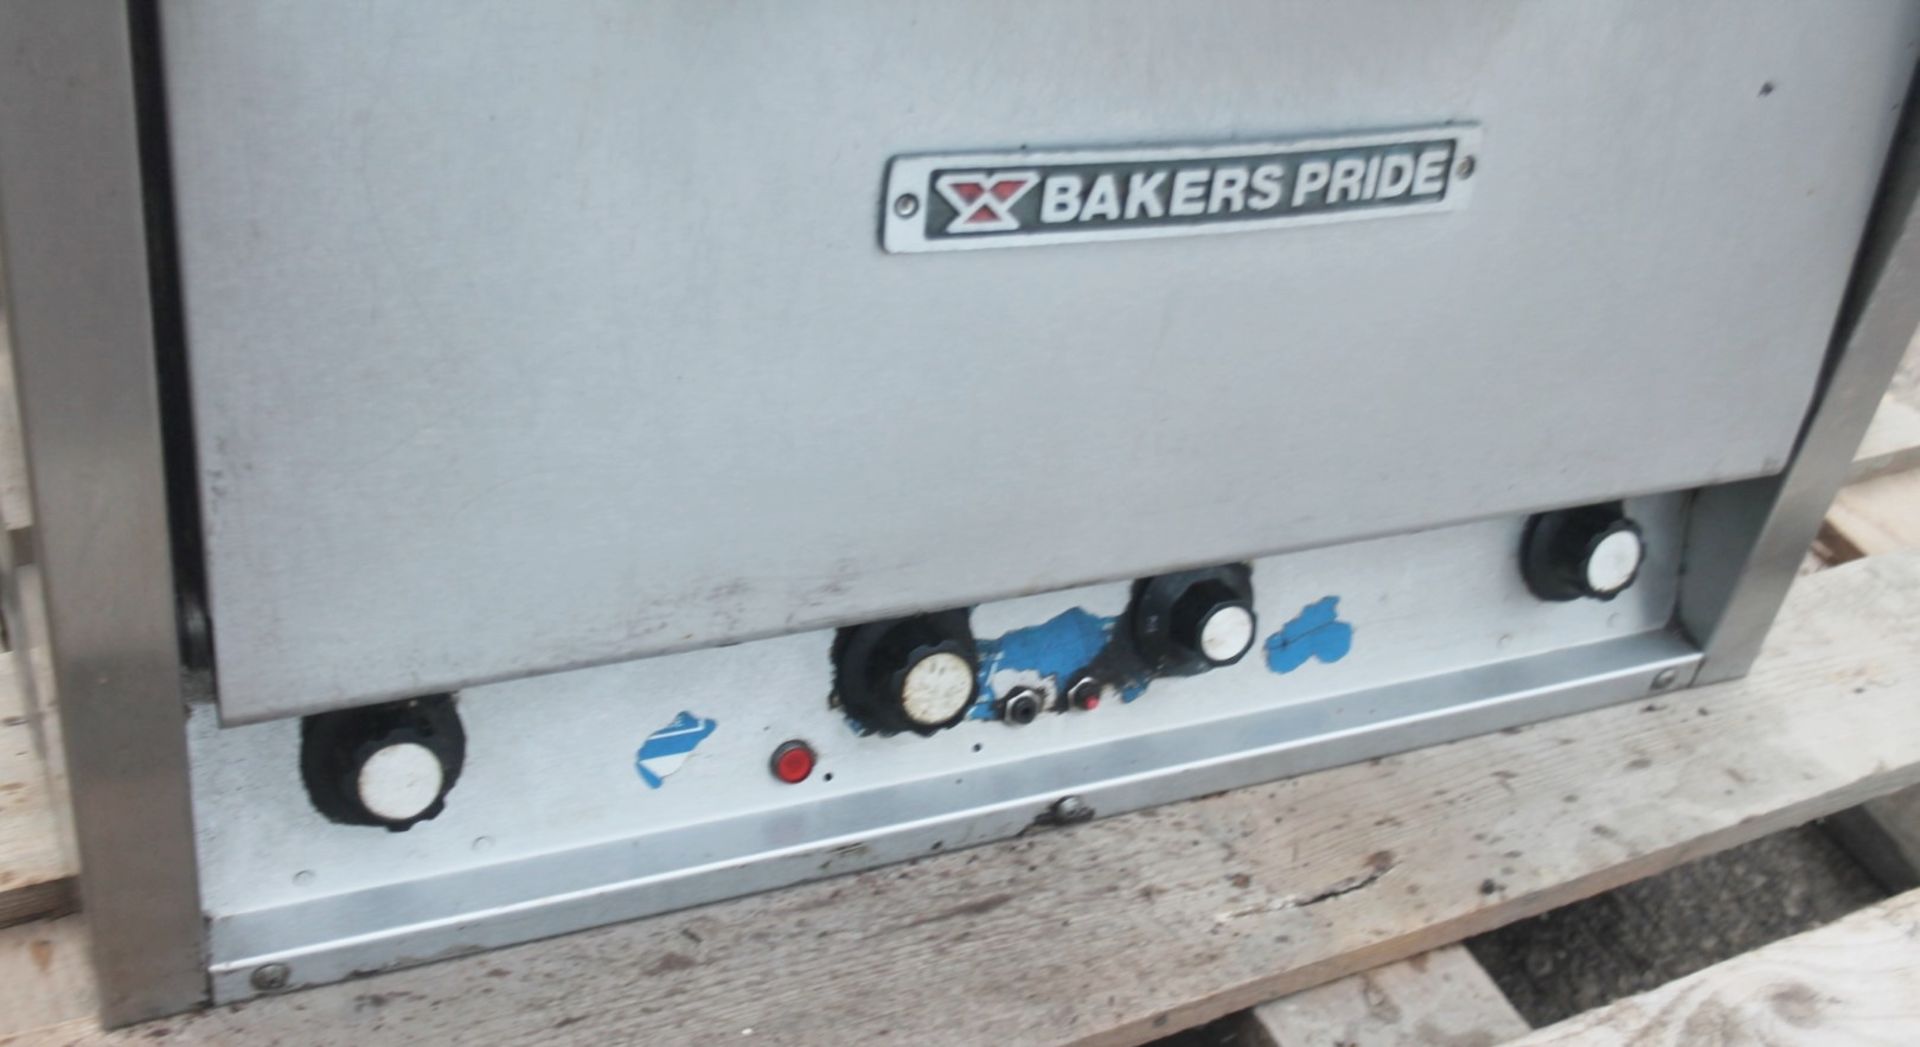 1 x Bakers Pride Three Deck Commercial Electric Pizza Oven - CL805 - Location: Altrincham - Image 7 of 7